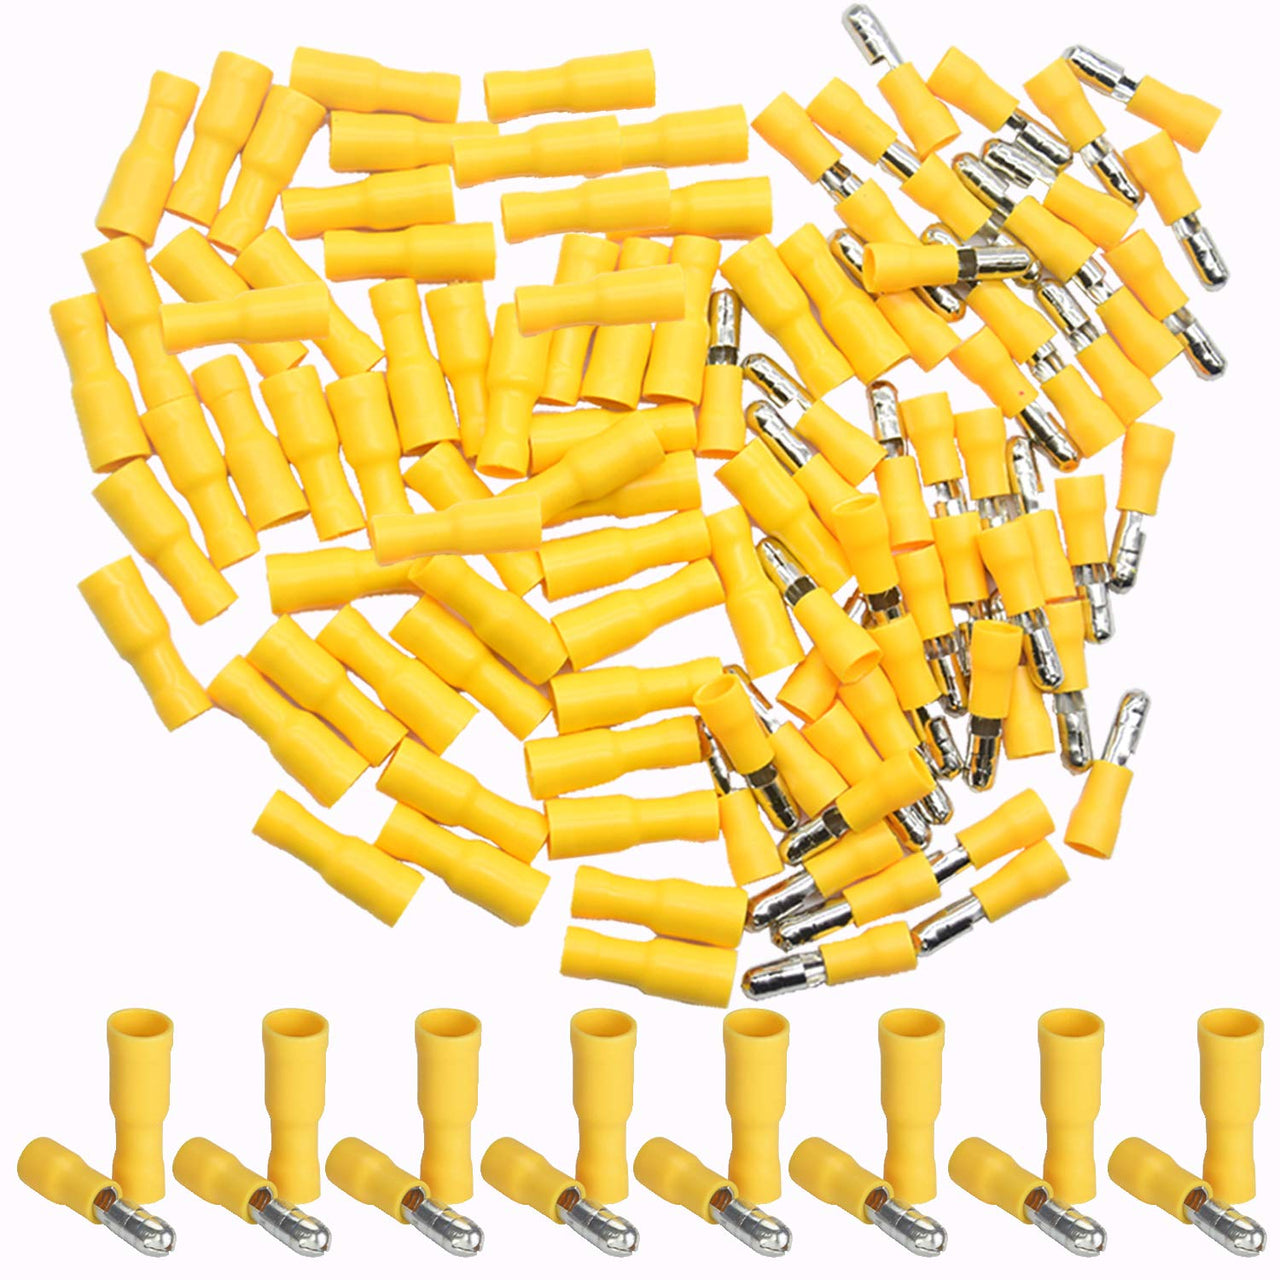 MK Audio 100Pcs 12-10 AWG of Yellow Insulated Female Male Bullet Connector Quick Splice Wire Terminals Wire Crimp Connectors